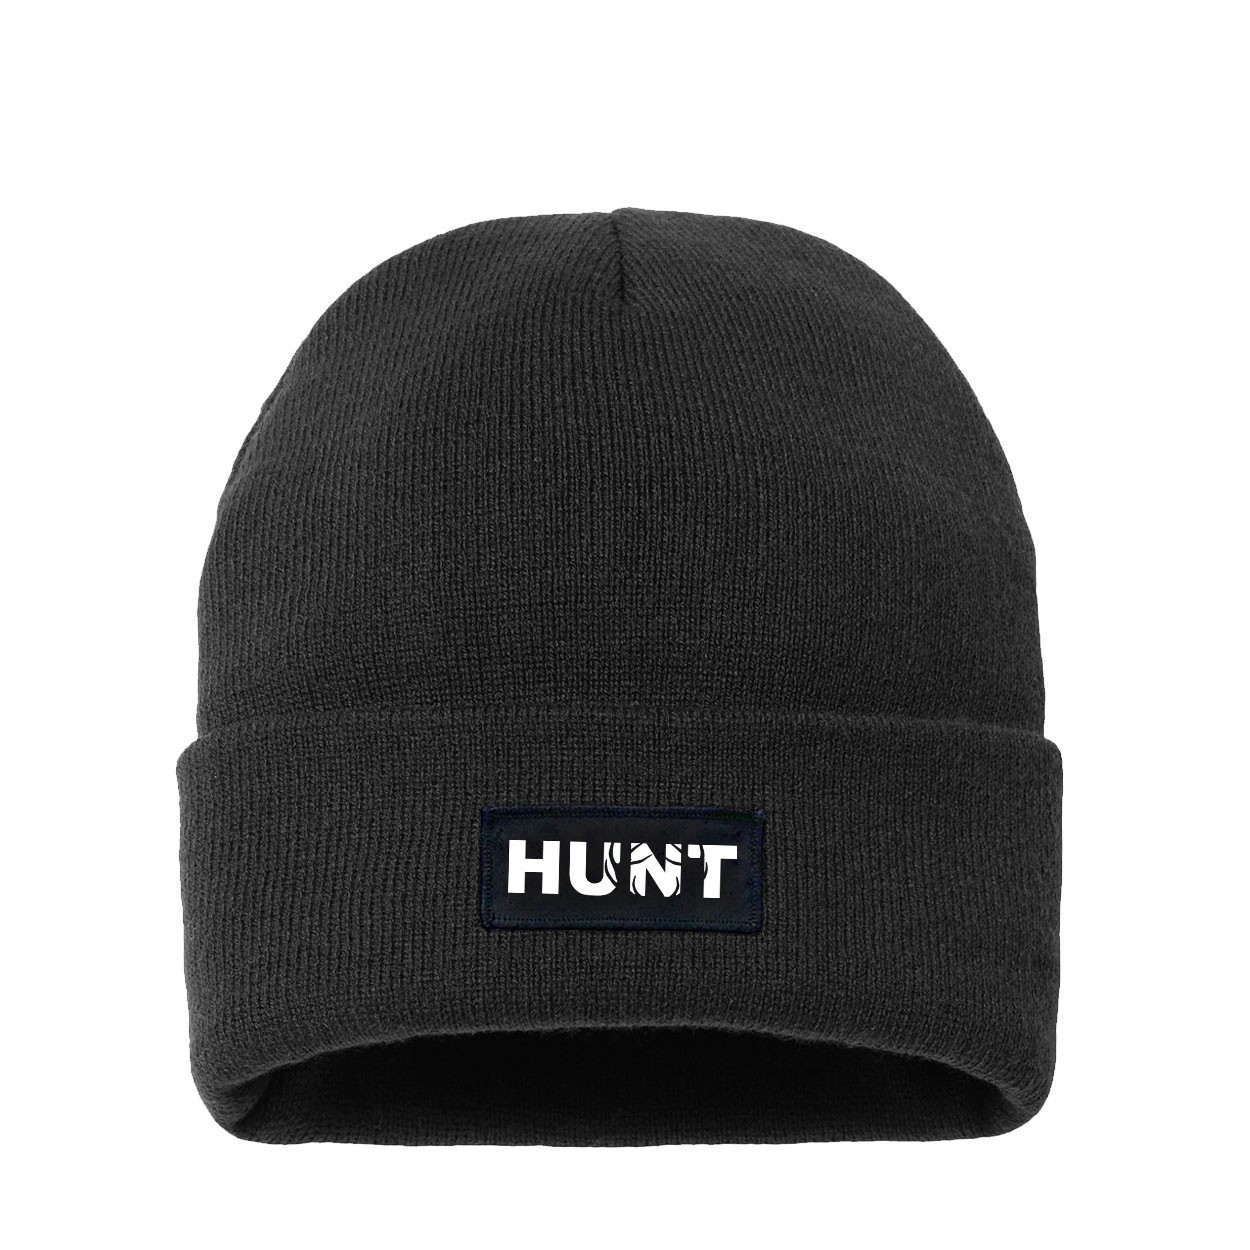 Hunt Rack Logo Night Out Woven Patch Night Out Sherpa Lined Cuffed Beanie Black (White Logo)